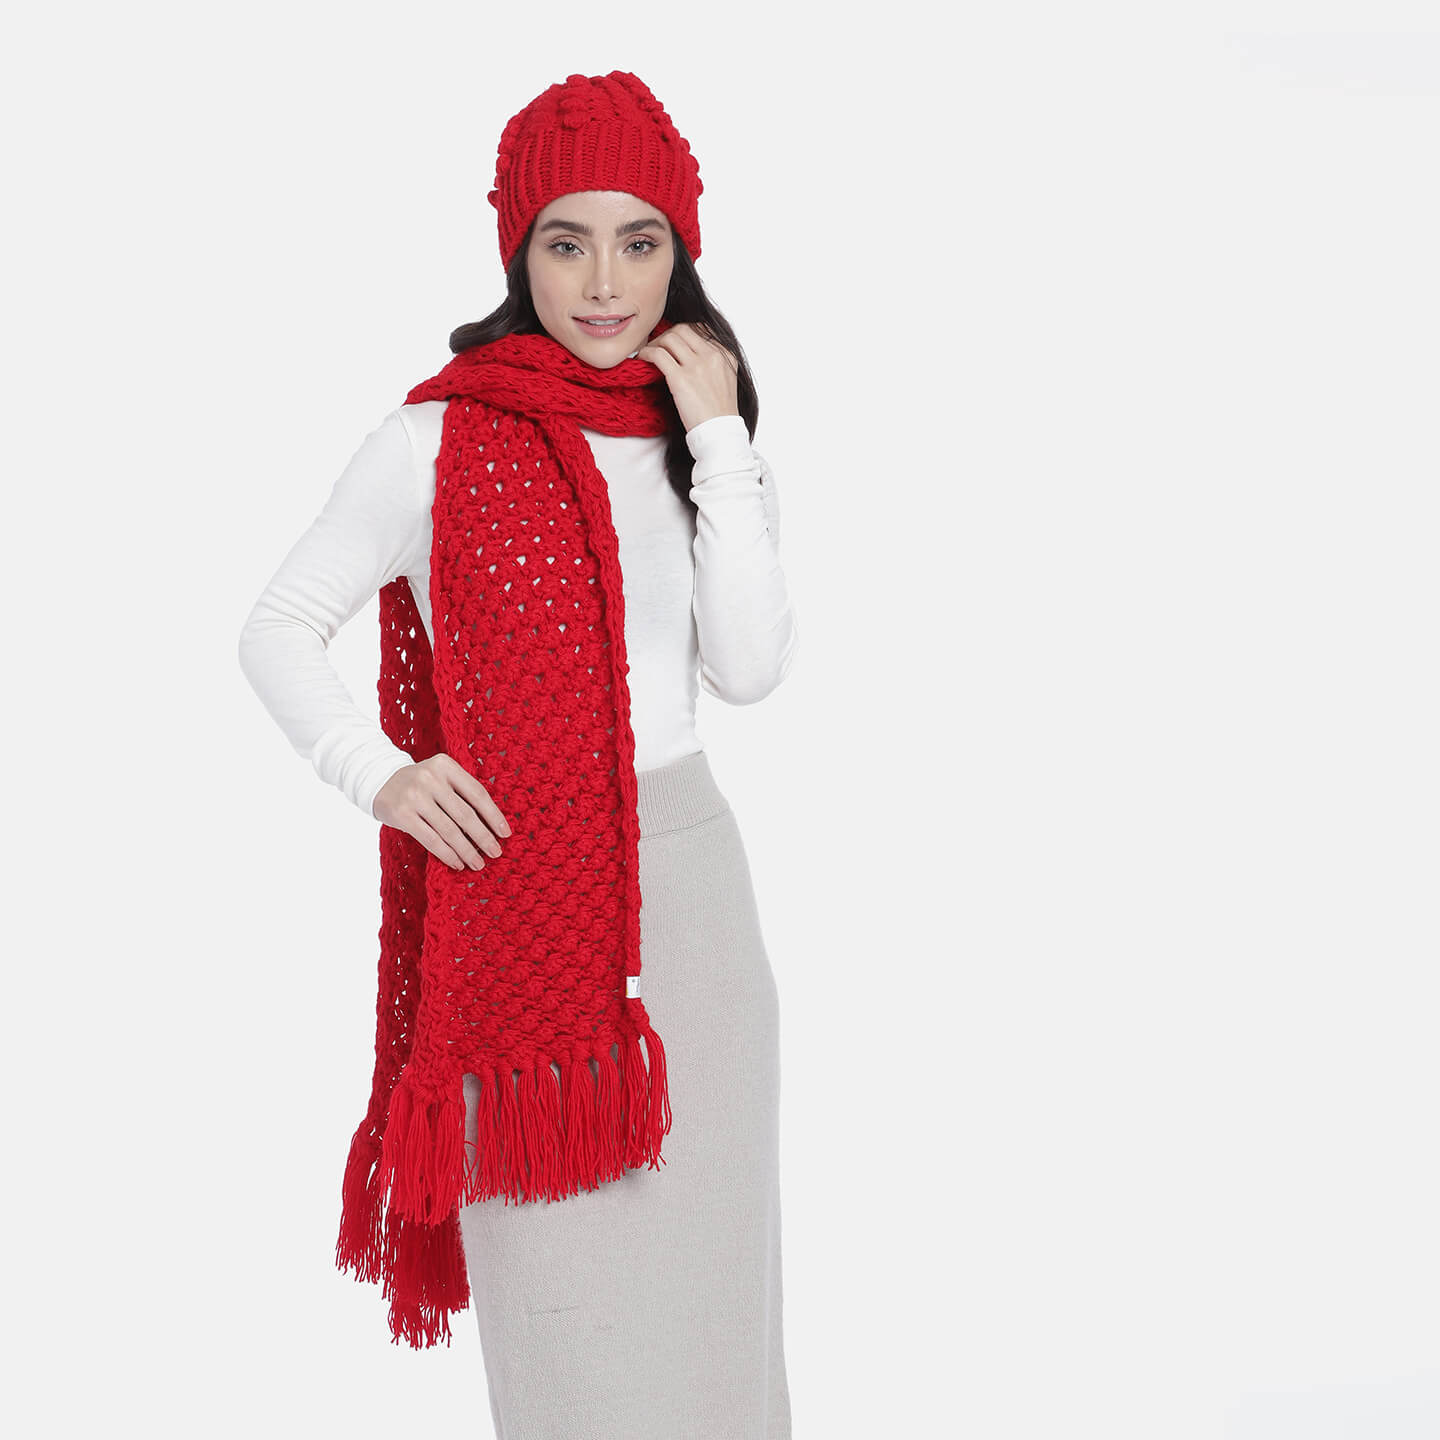 Beanie and Scarf Coordinating Set - 3198